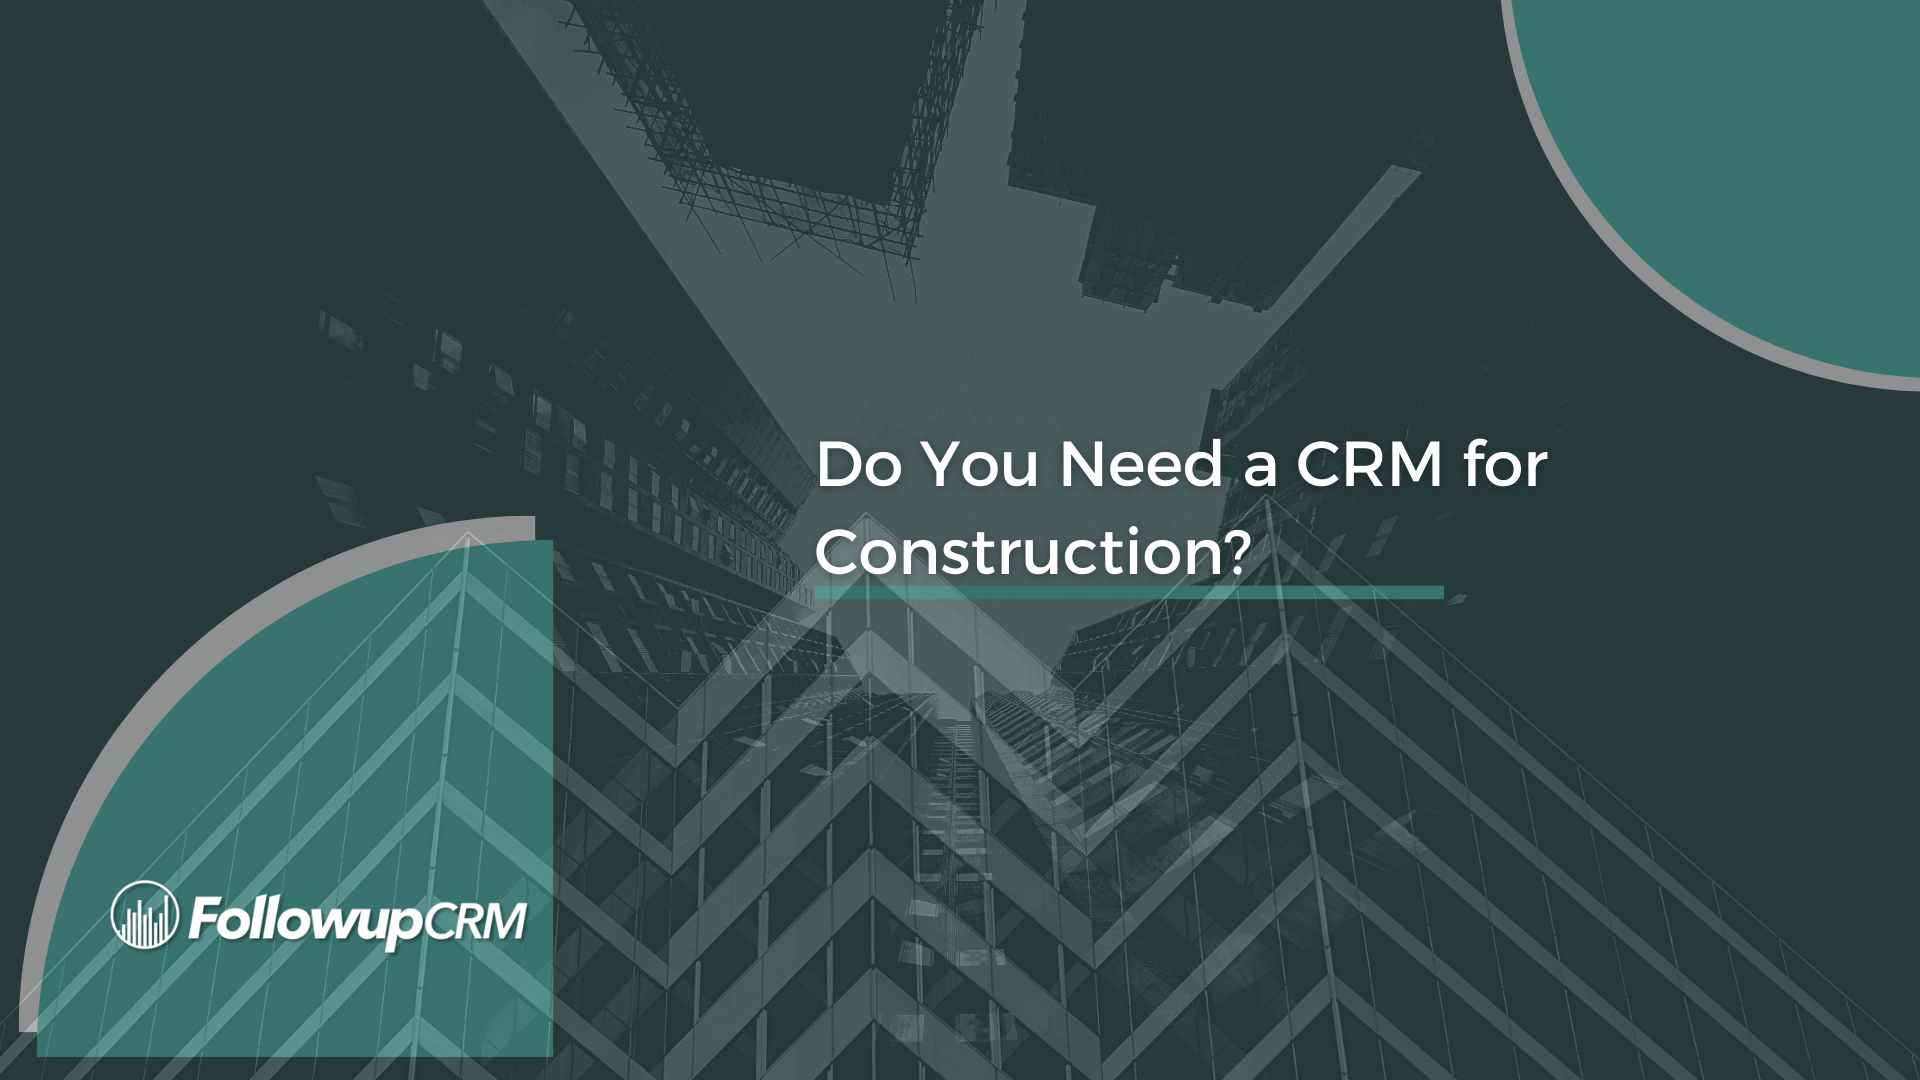 Do You Need a CRM for Construction?